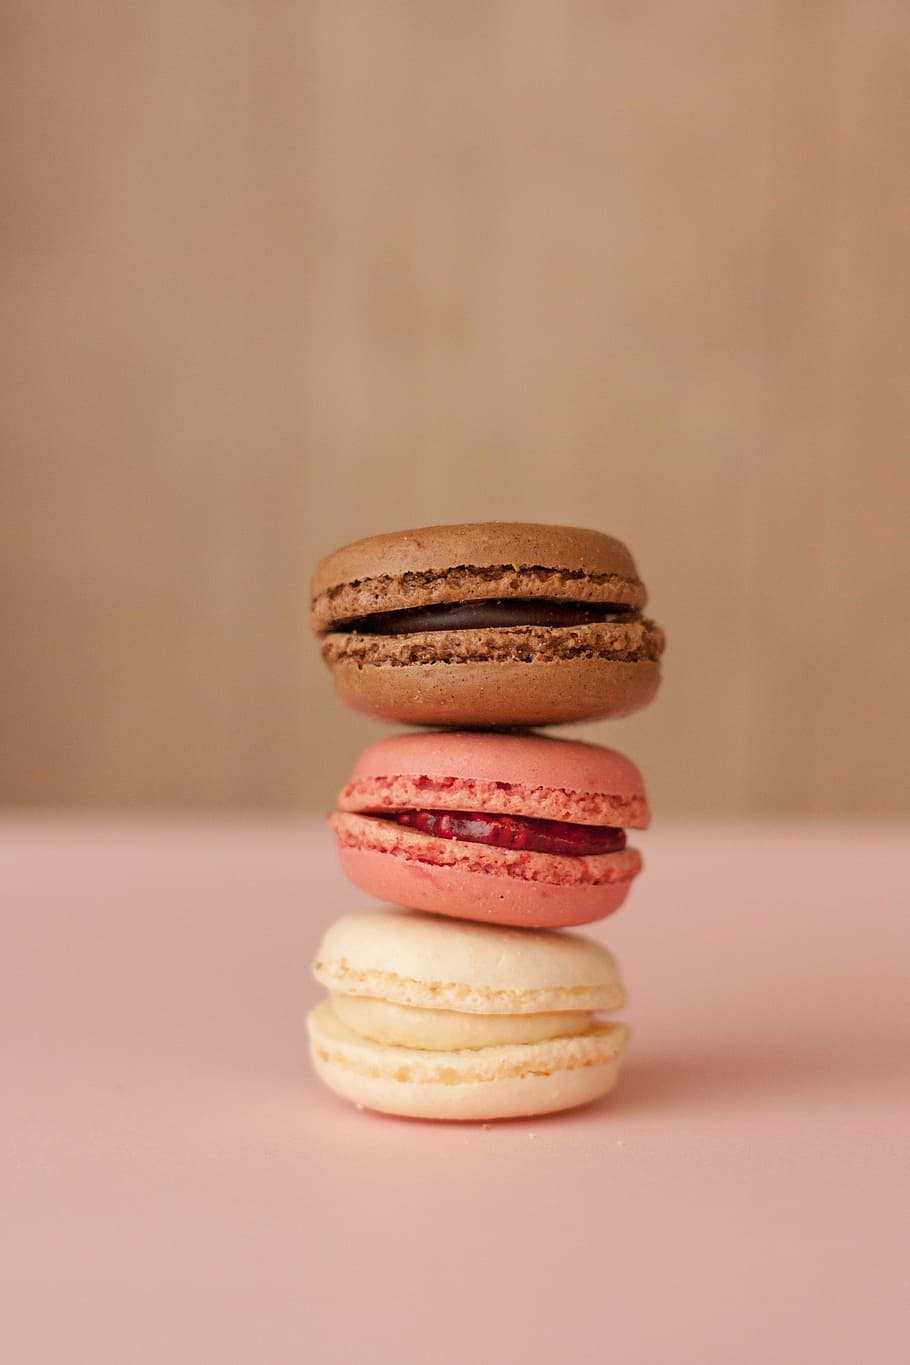 three french macaroons, pastry, macaron, sweet, bakery, dessert, biscuit, colorful, food, confectionery